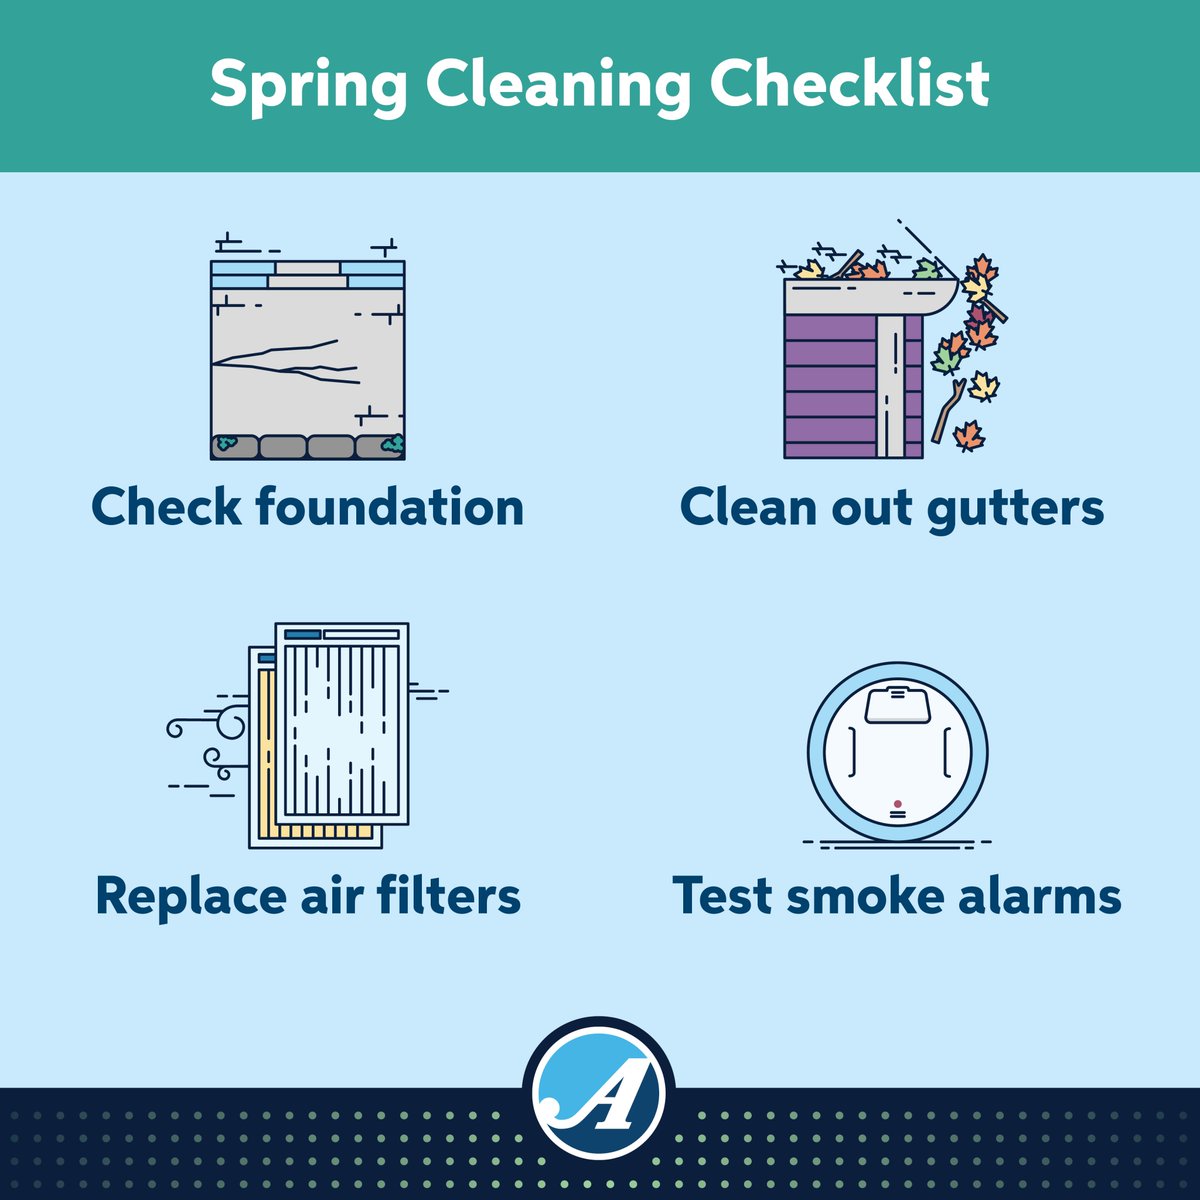 Spring is officially here! Check out our ultimate spring-cleaning
checklist for homeowners.

#independentinsuranceagent #trustedchoiceagent #spring #HappySpring #SpringSeason #locallyowned #veteranowned #SpringHomeMaintenance #wecanhelpprotectwhatmattersmost